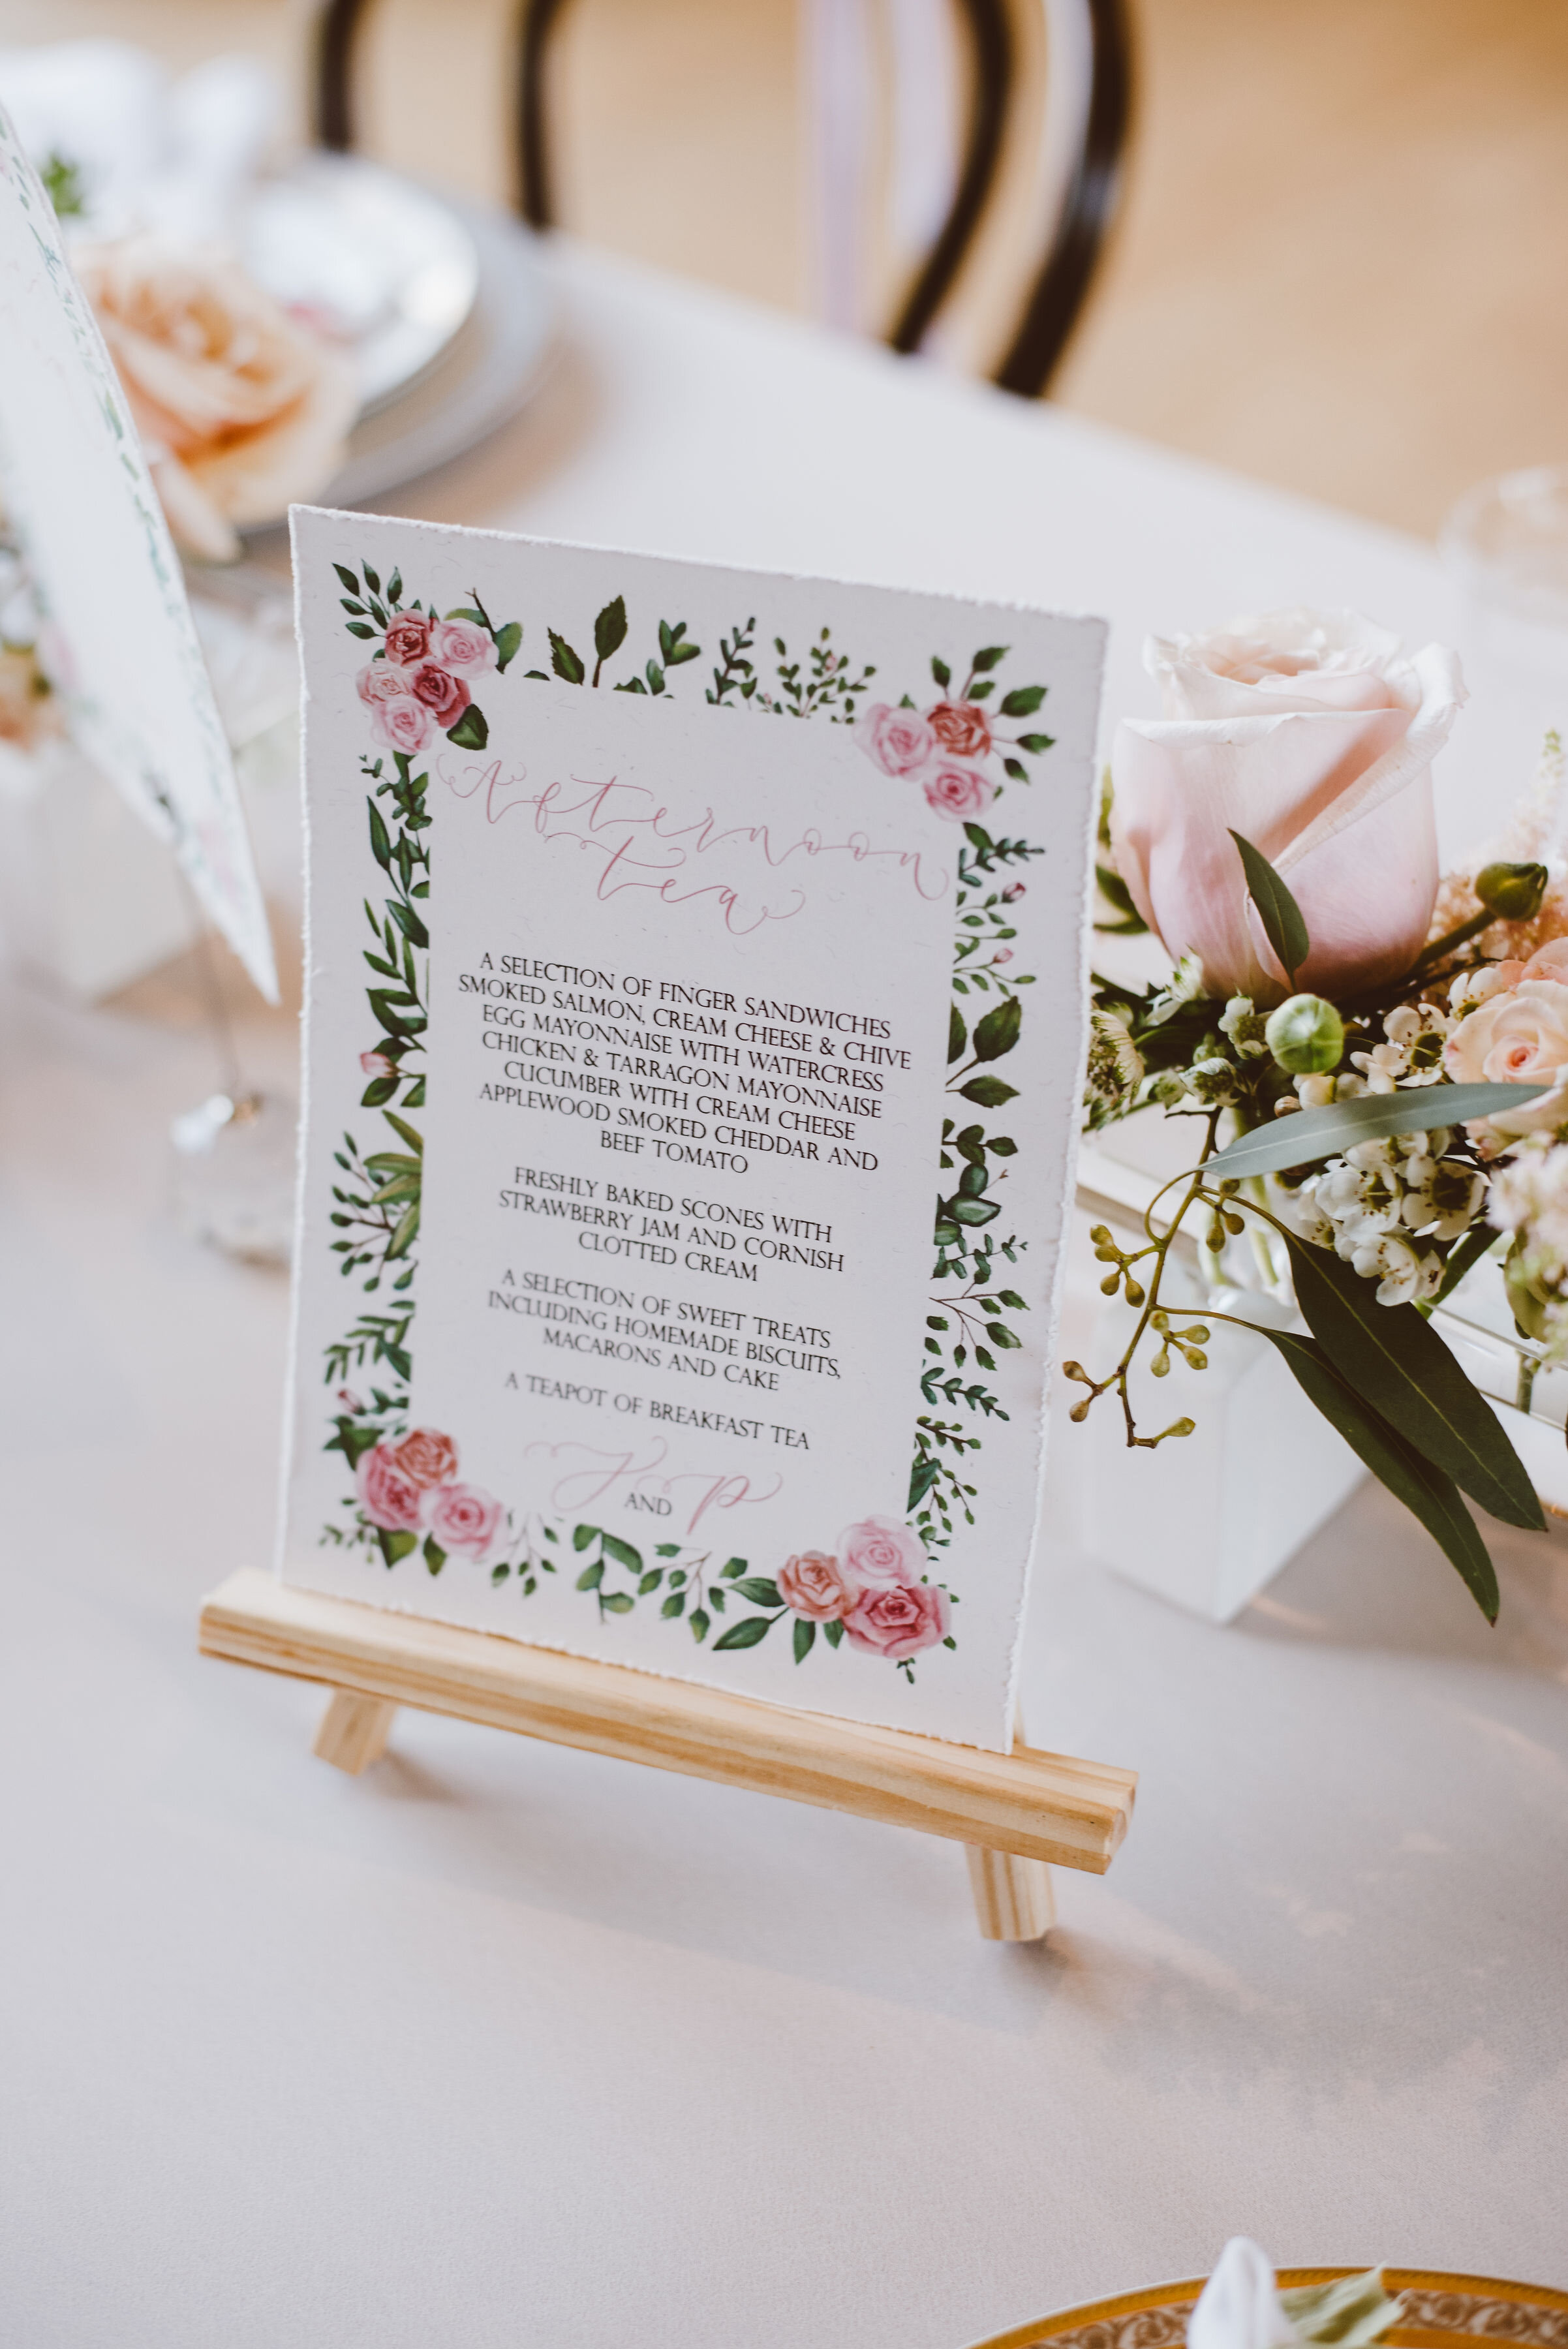 Afternoon tea wedding  - Luxury recycled paper floral wedding menu with pink roses and greenery and hand-lettered calligraphy by The Amyverse - Eco friendly wedding stationery